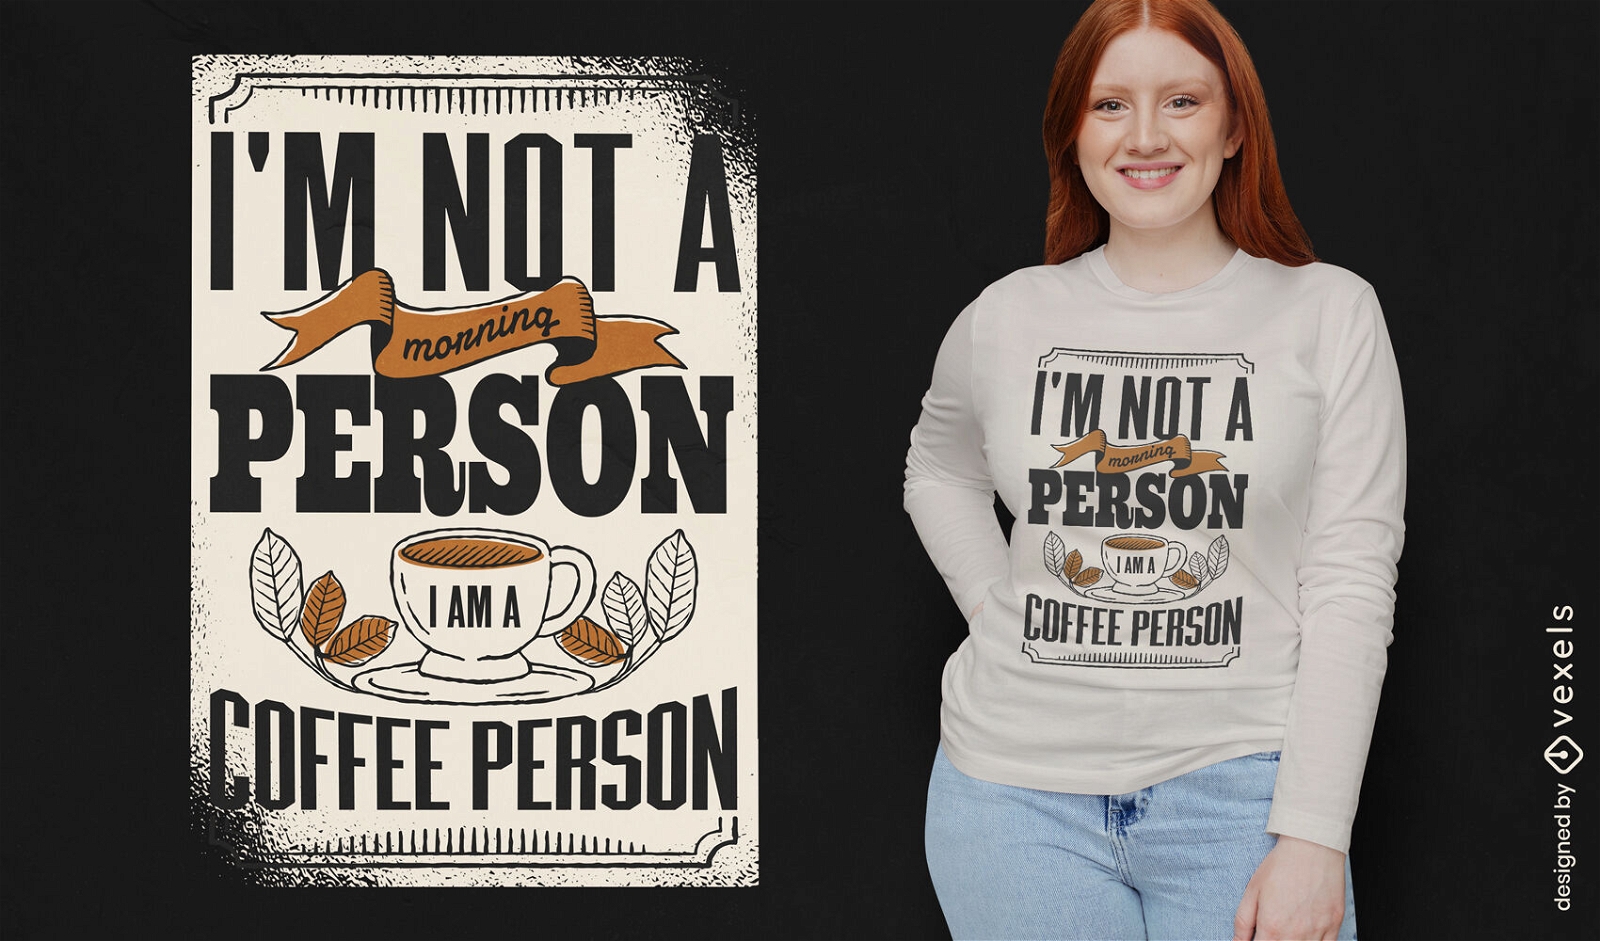 Coffee person funny quote t-shirt design